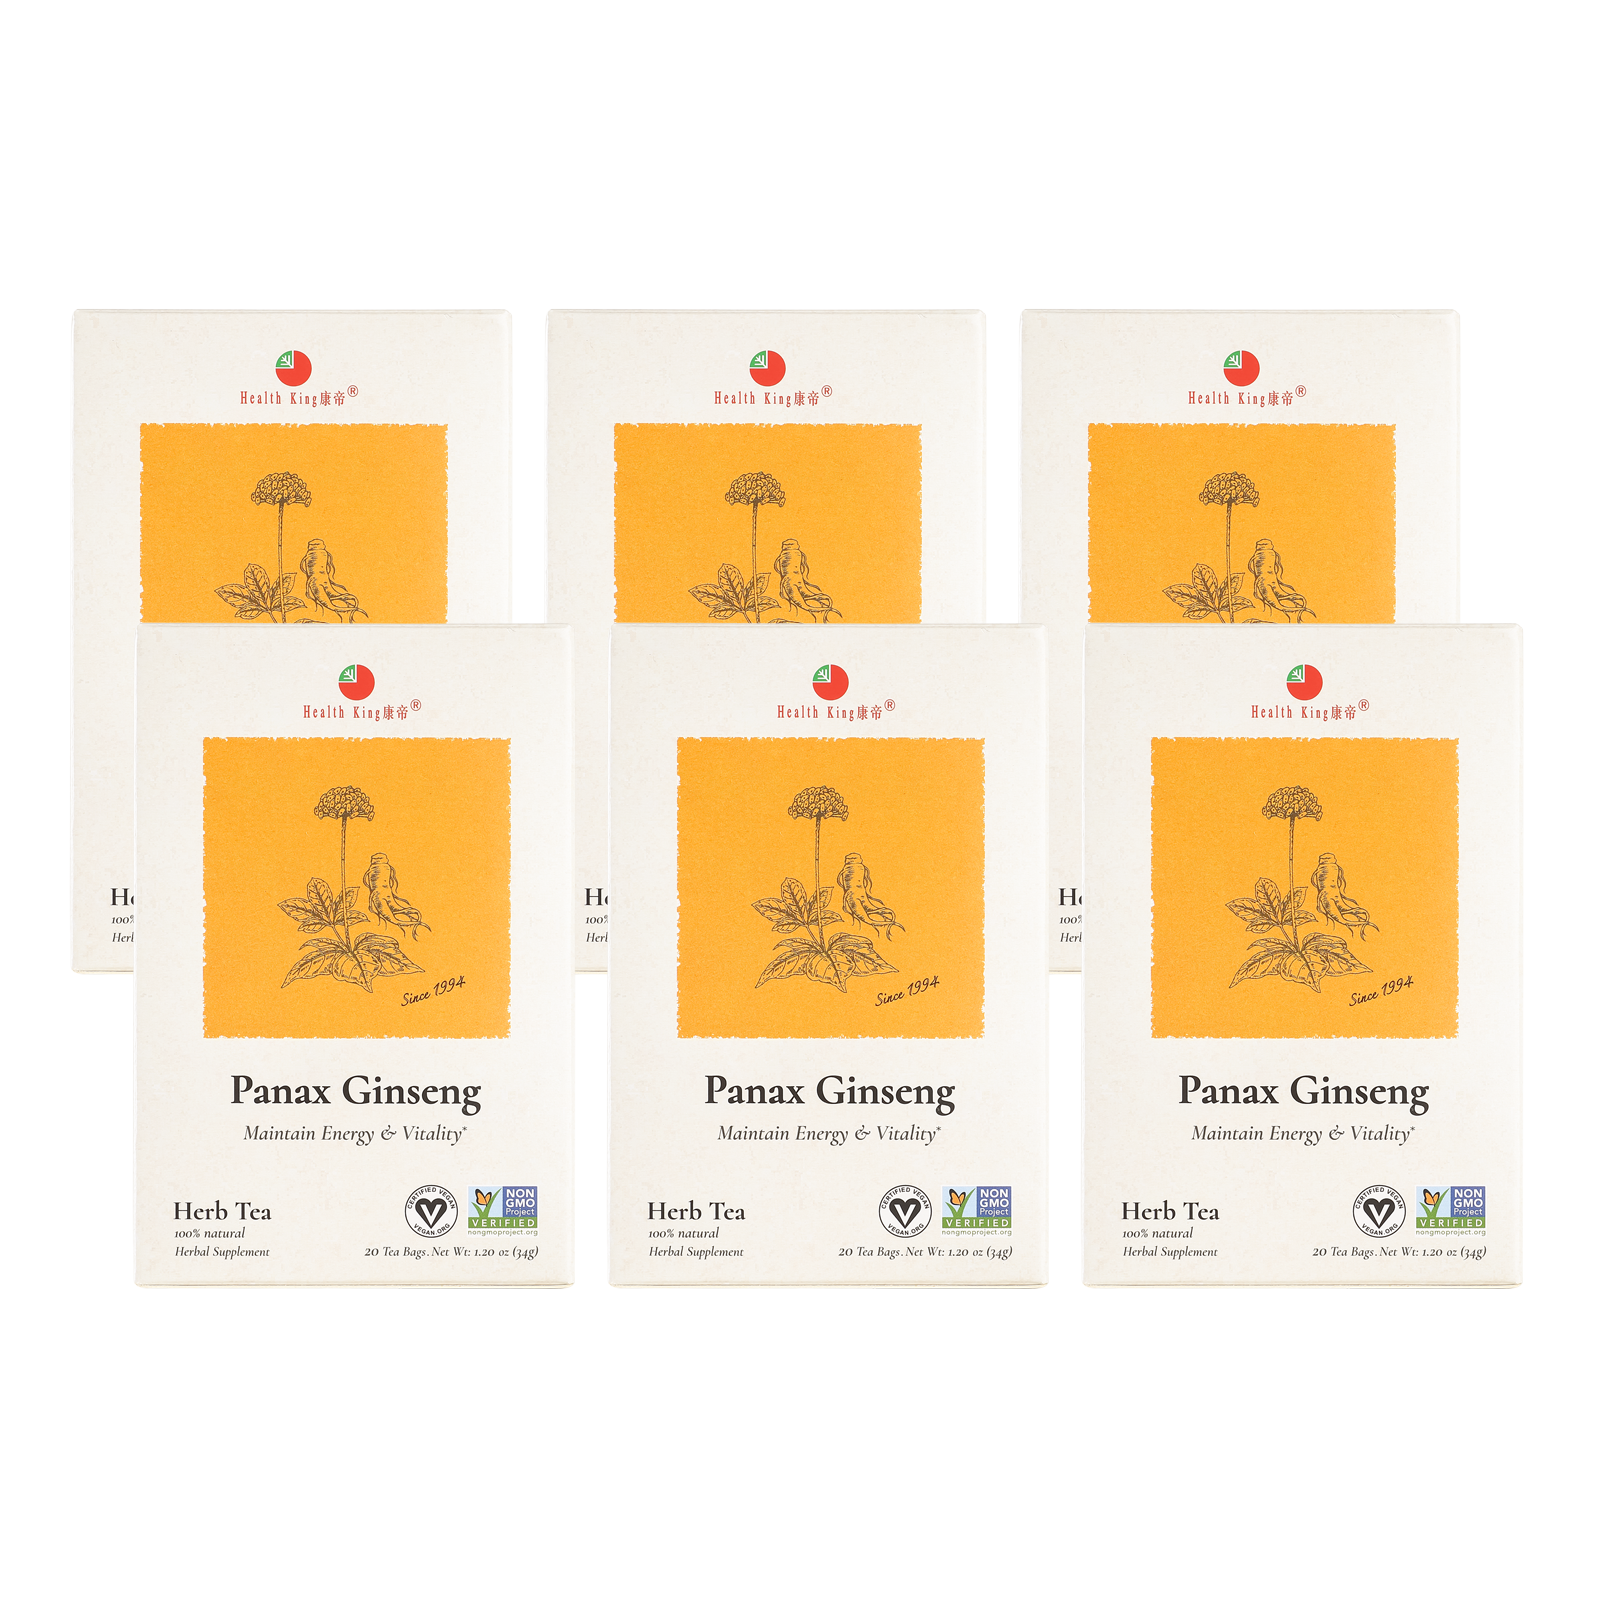 Six boxes of Panax Ginseng Herb Tea designed for daily energy and vitality support